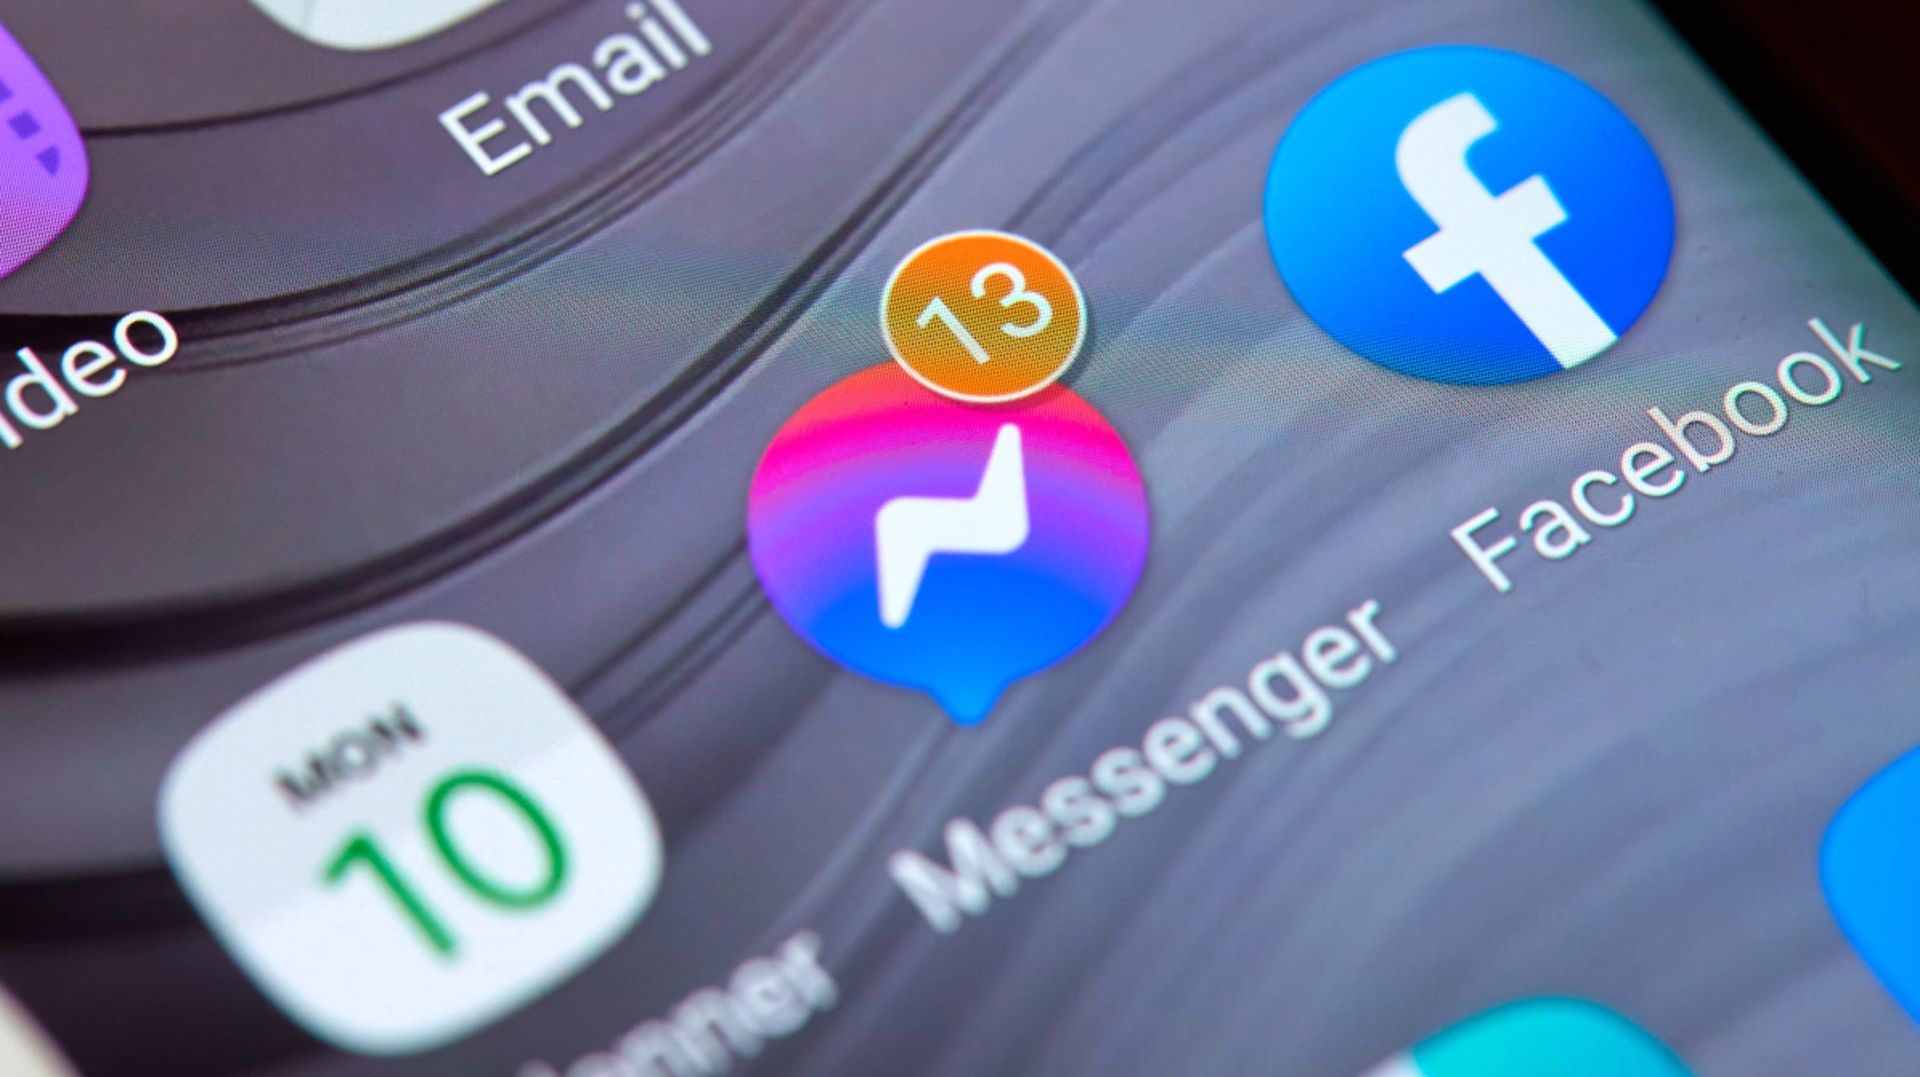 Today we are going to show you how to see restricted messages on Messenger?